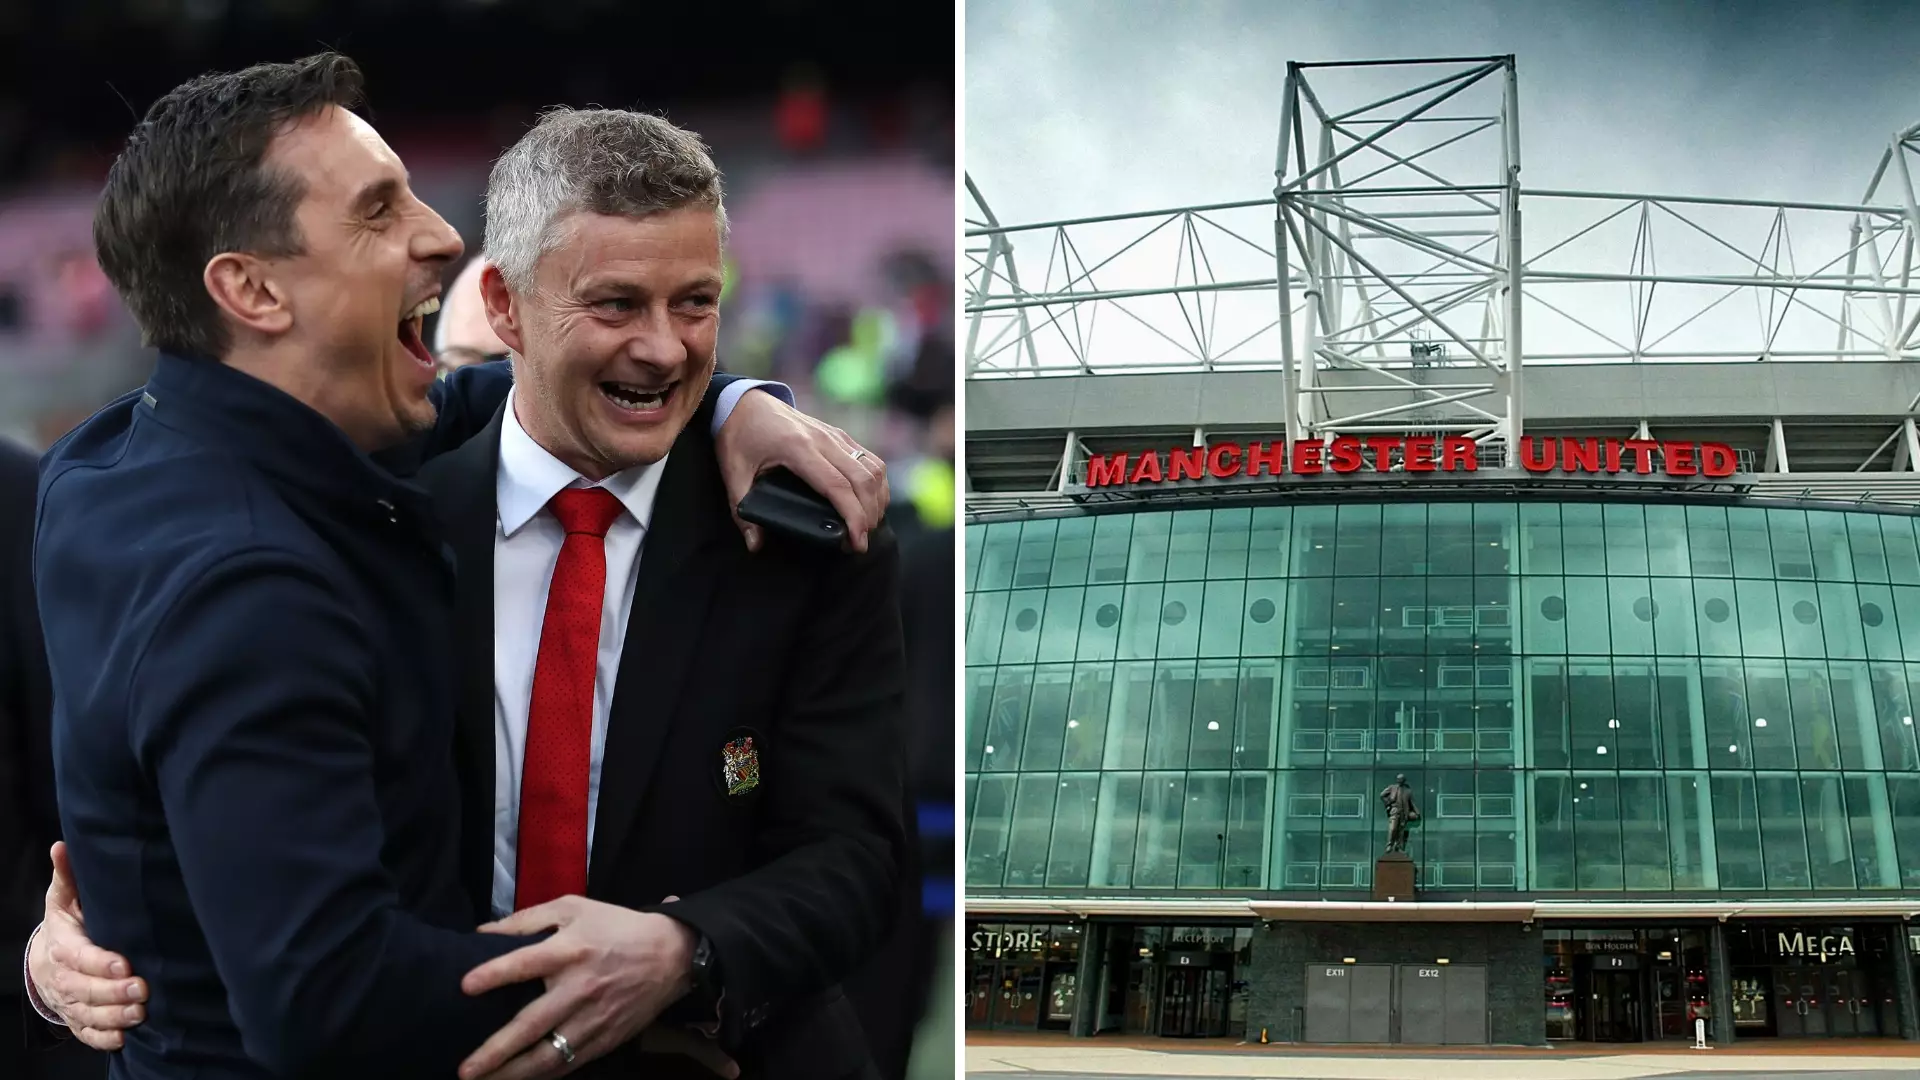 Gary Neville Claims Manchester United Should Sell Old Trafford's Naming Rights For £80m Per Year